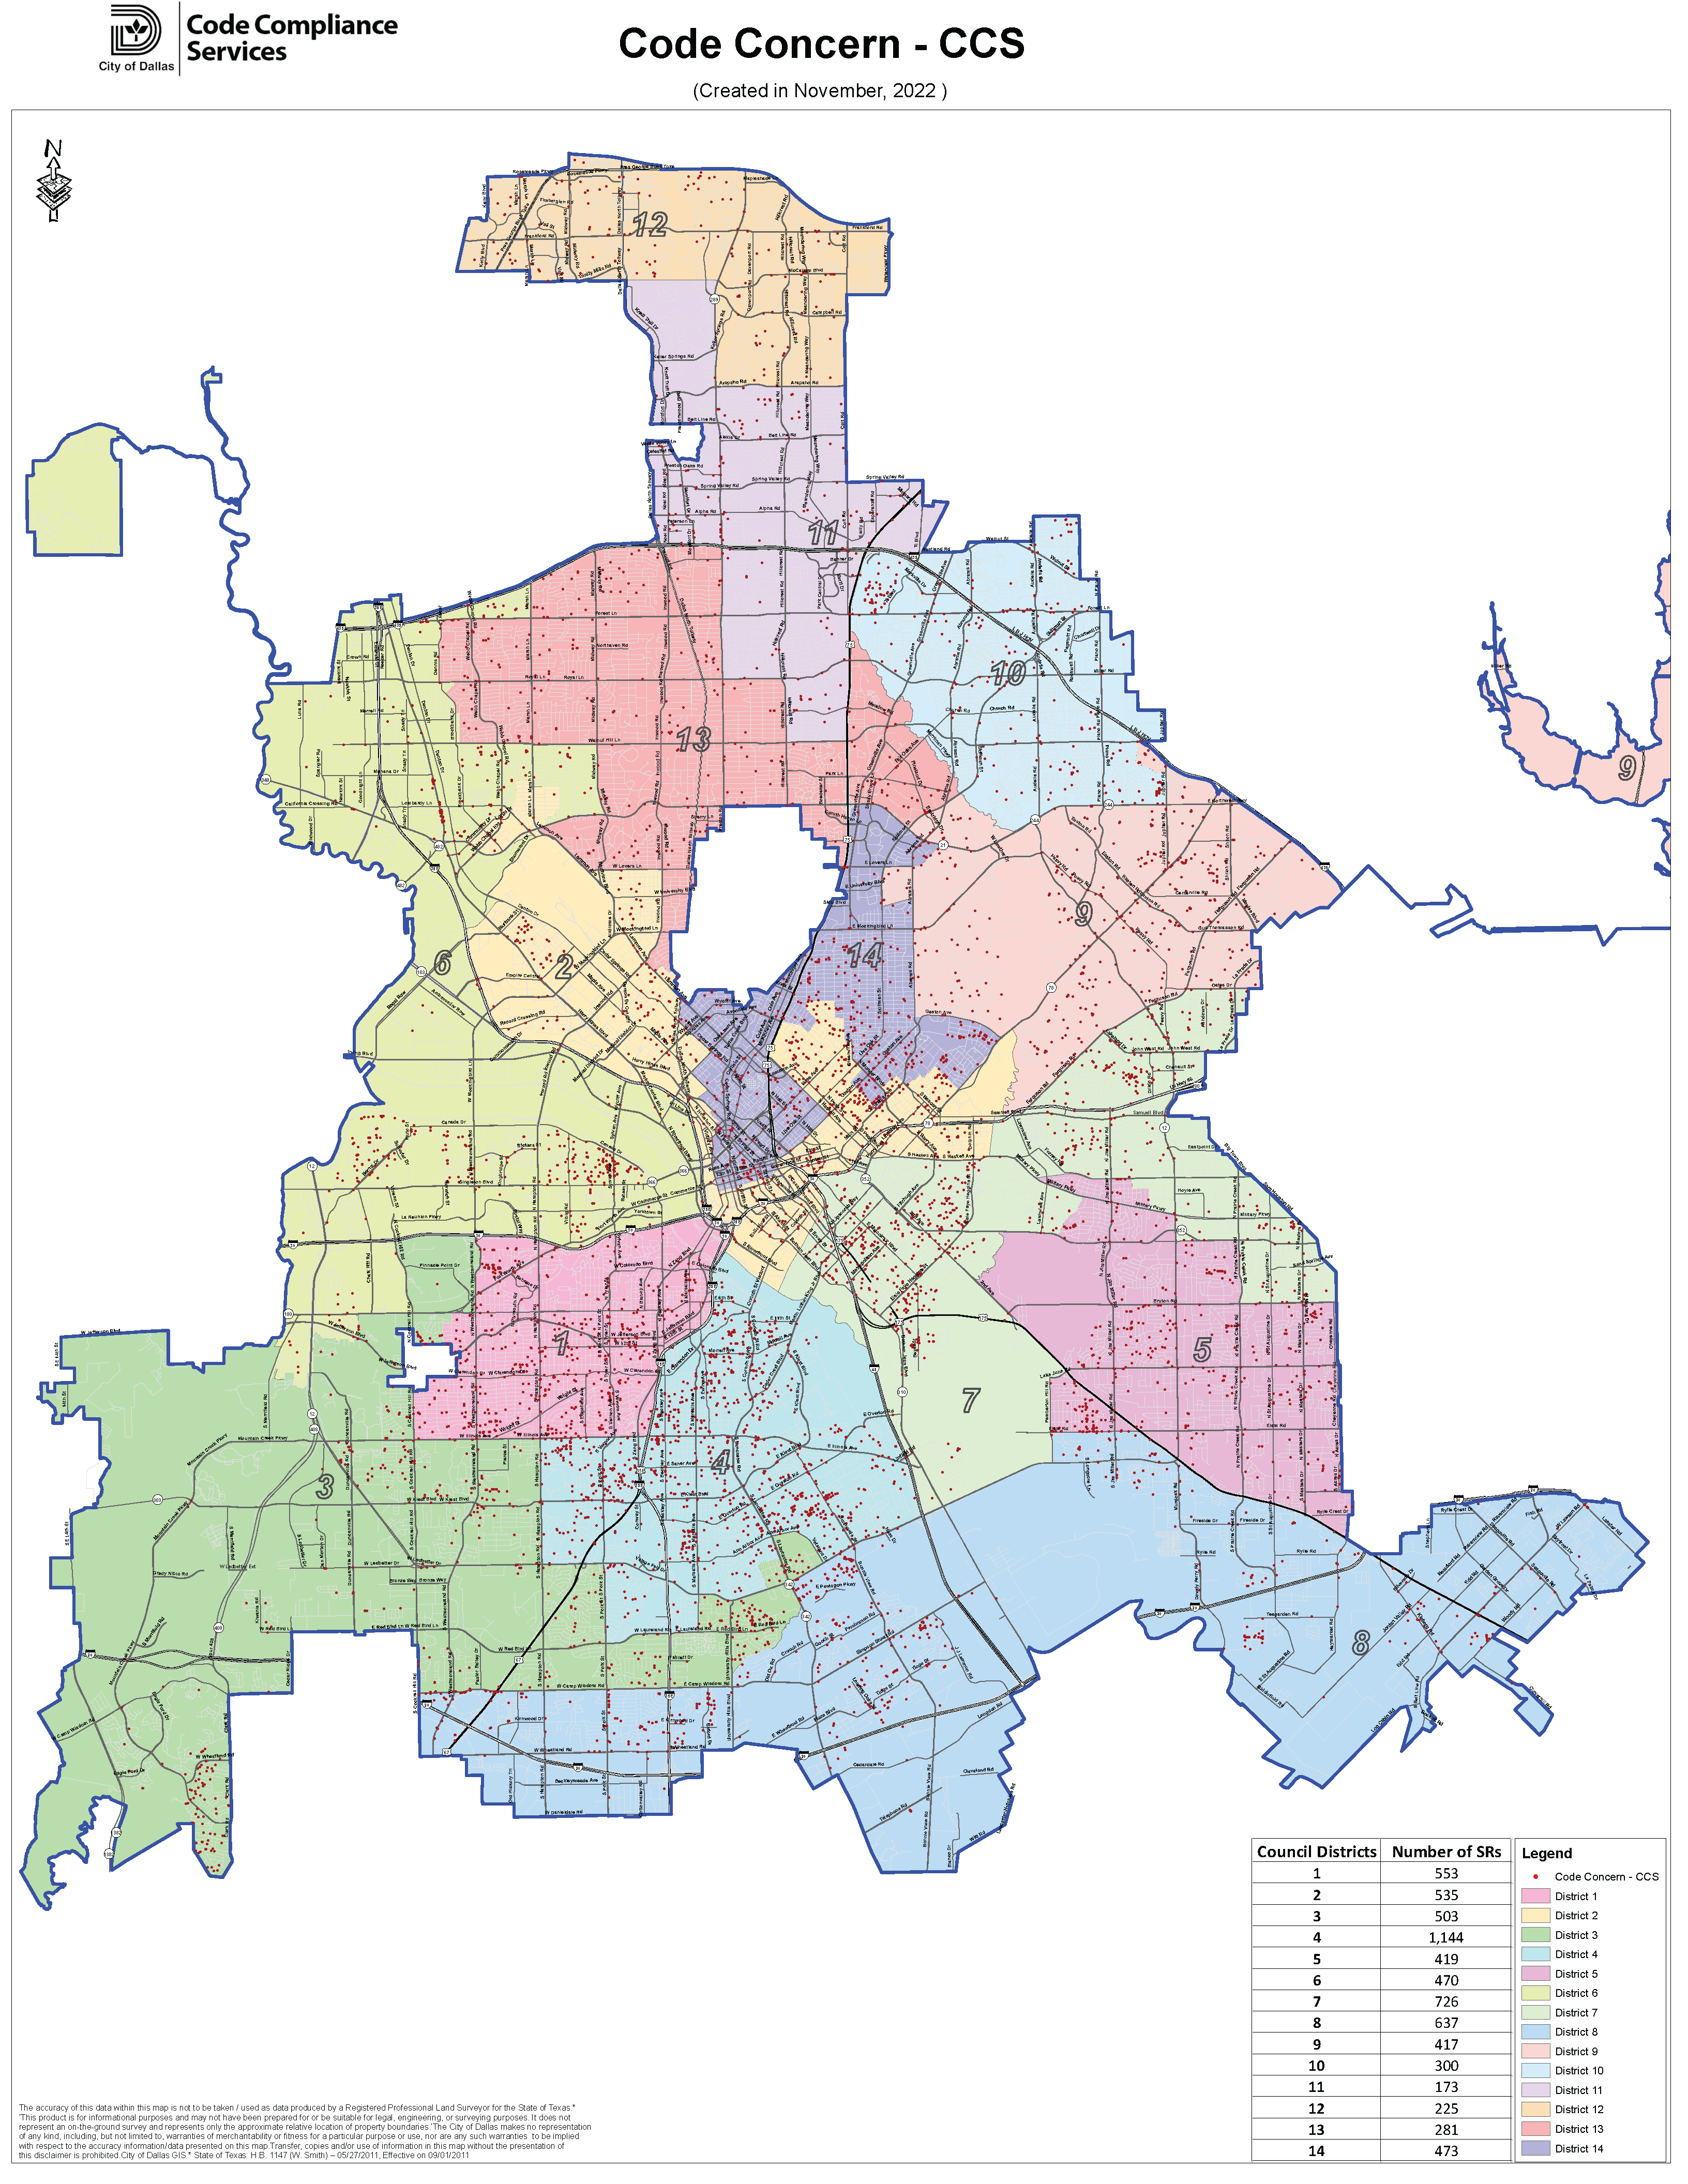 City of Dallas Code Concern Service Request Ponit Map for November 2022.png